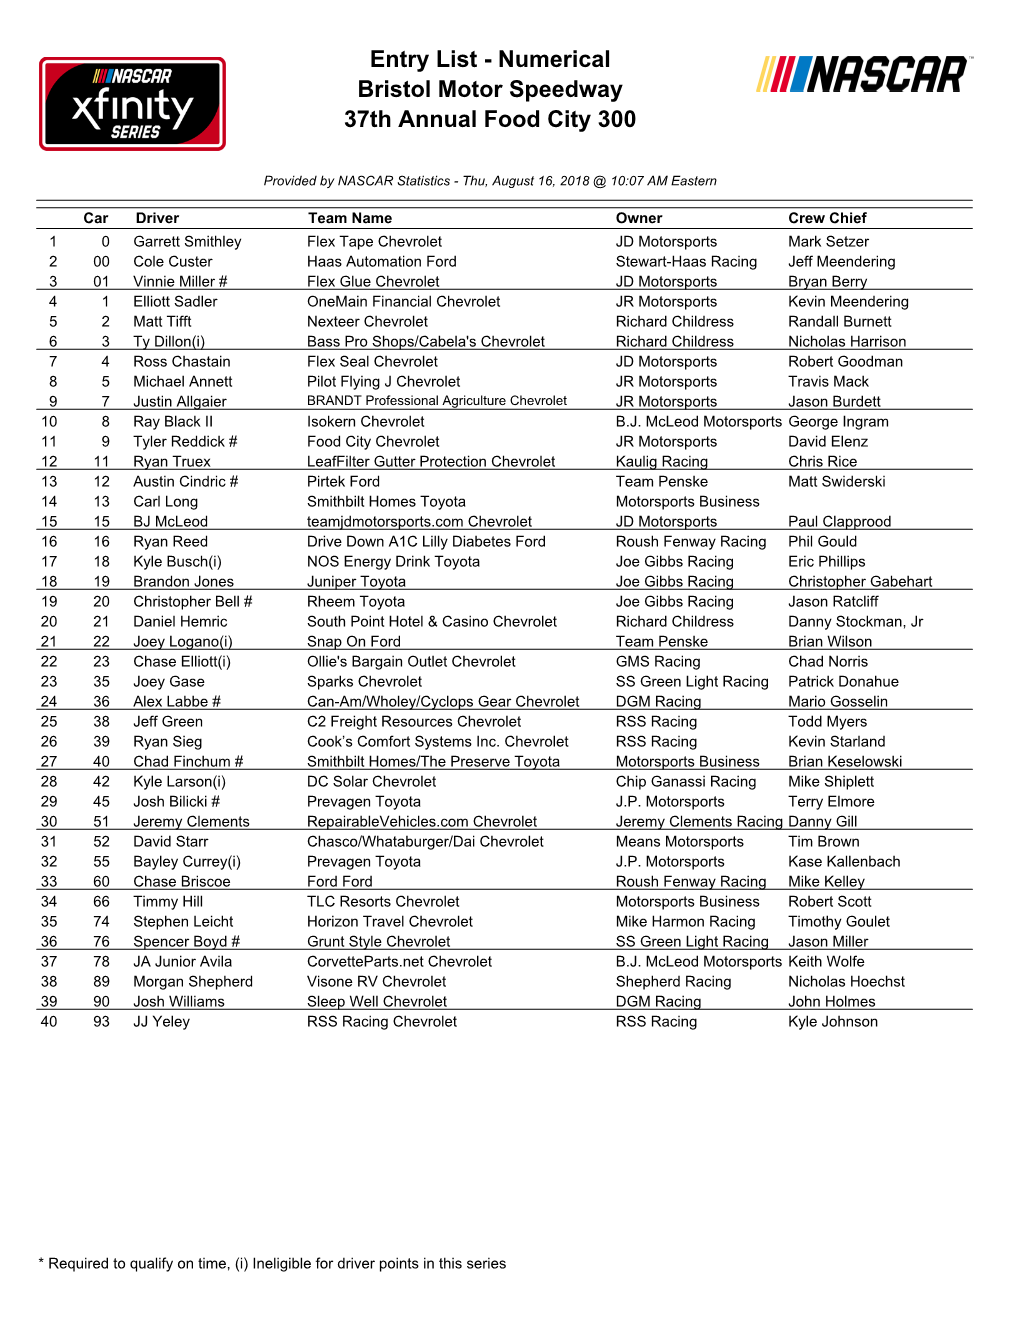 Entry List - Numerical Bristol Motor Speedway 37Th Annual Food City 300